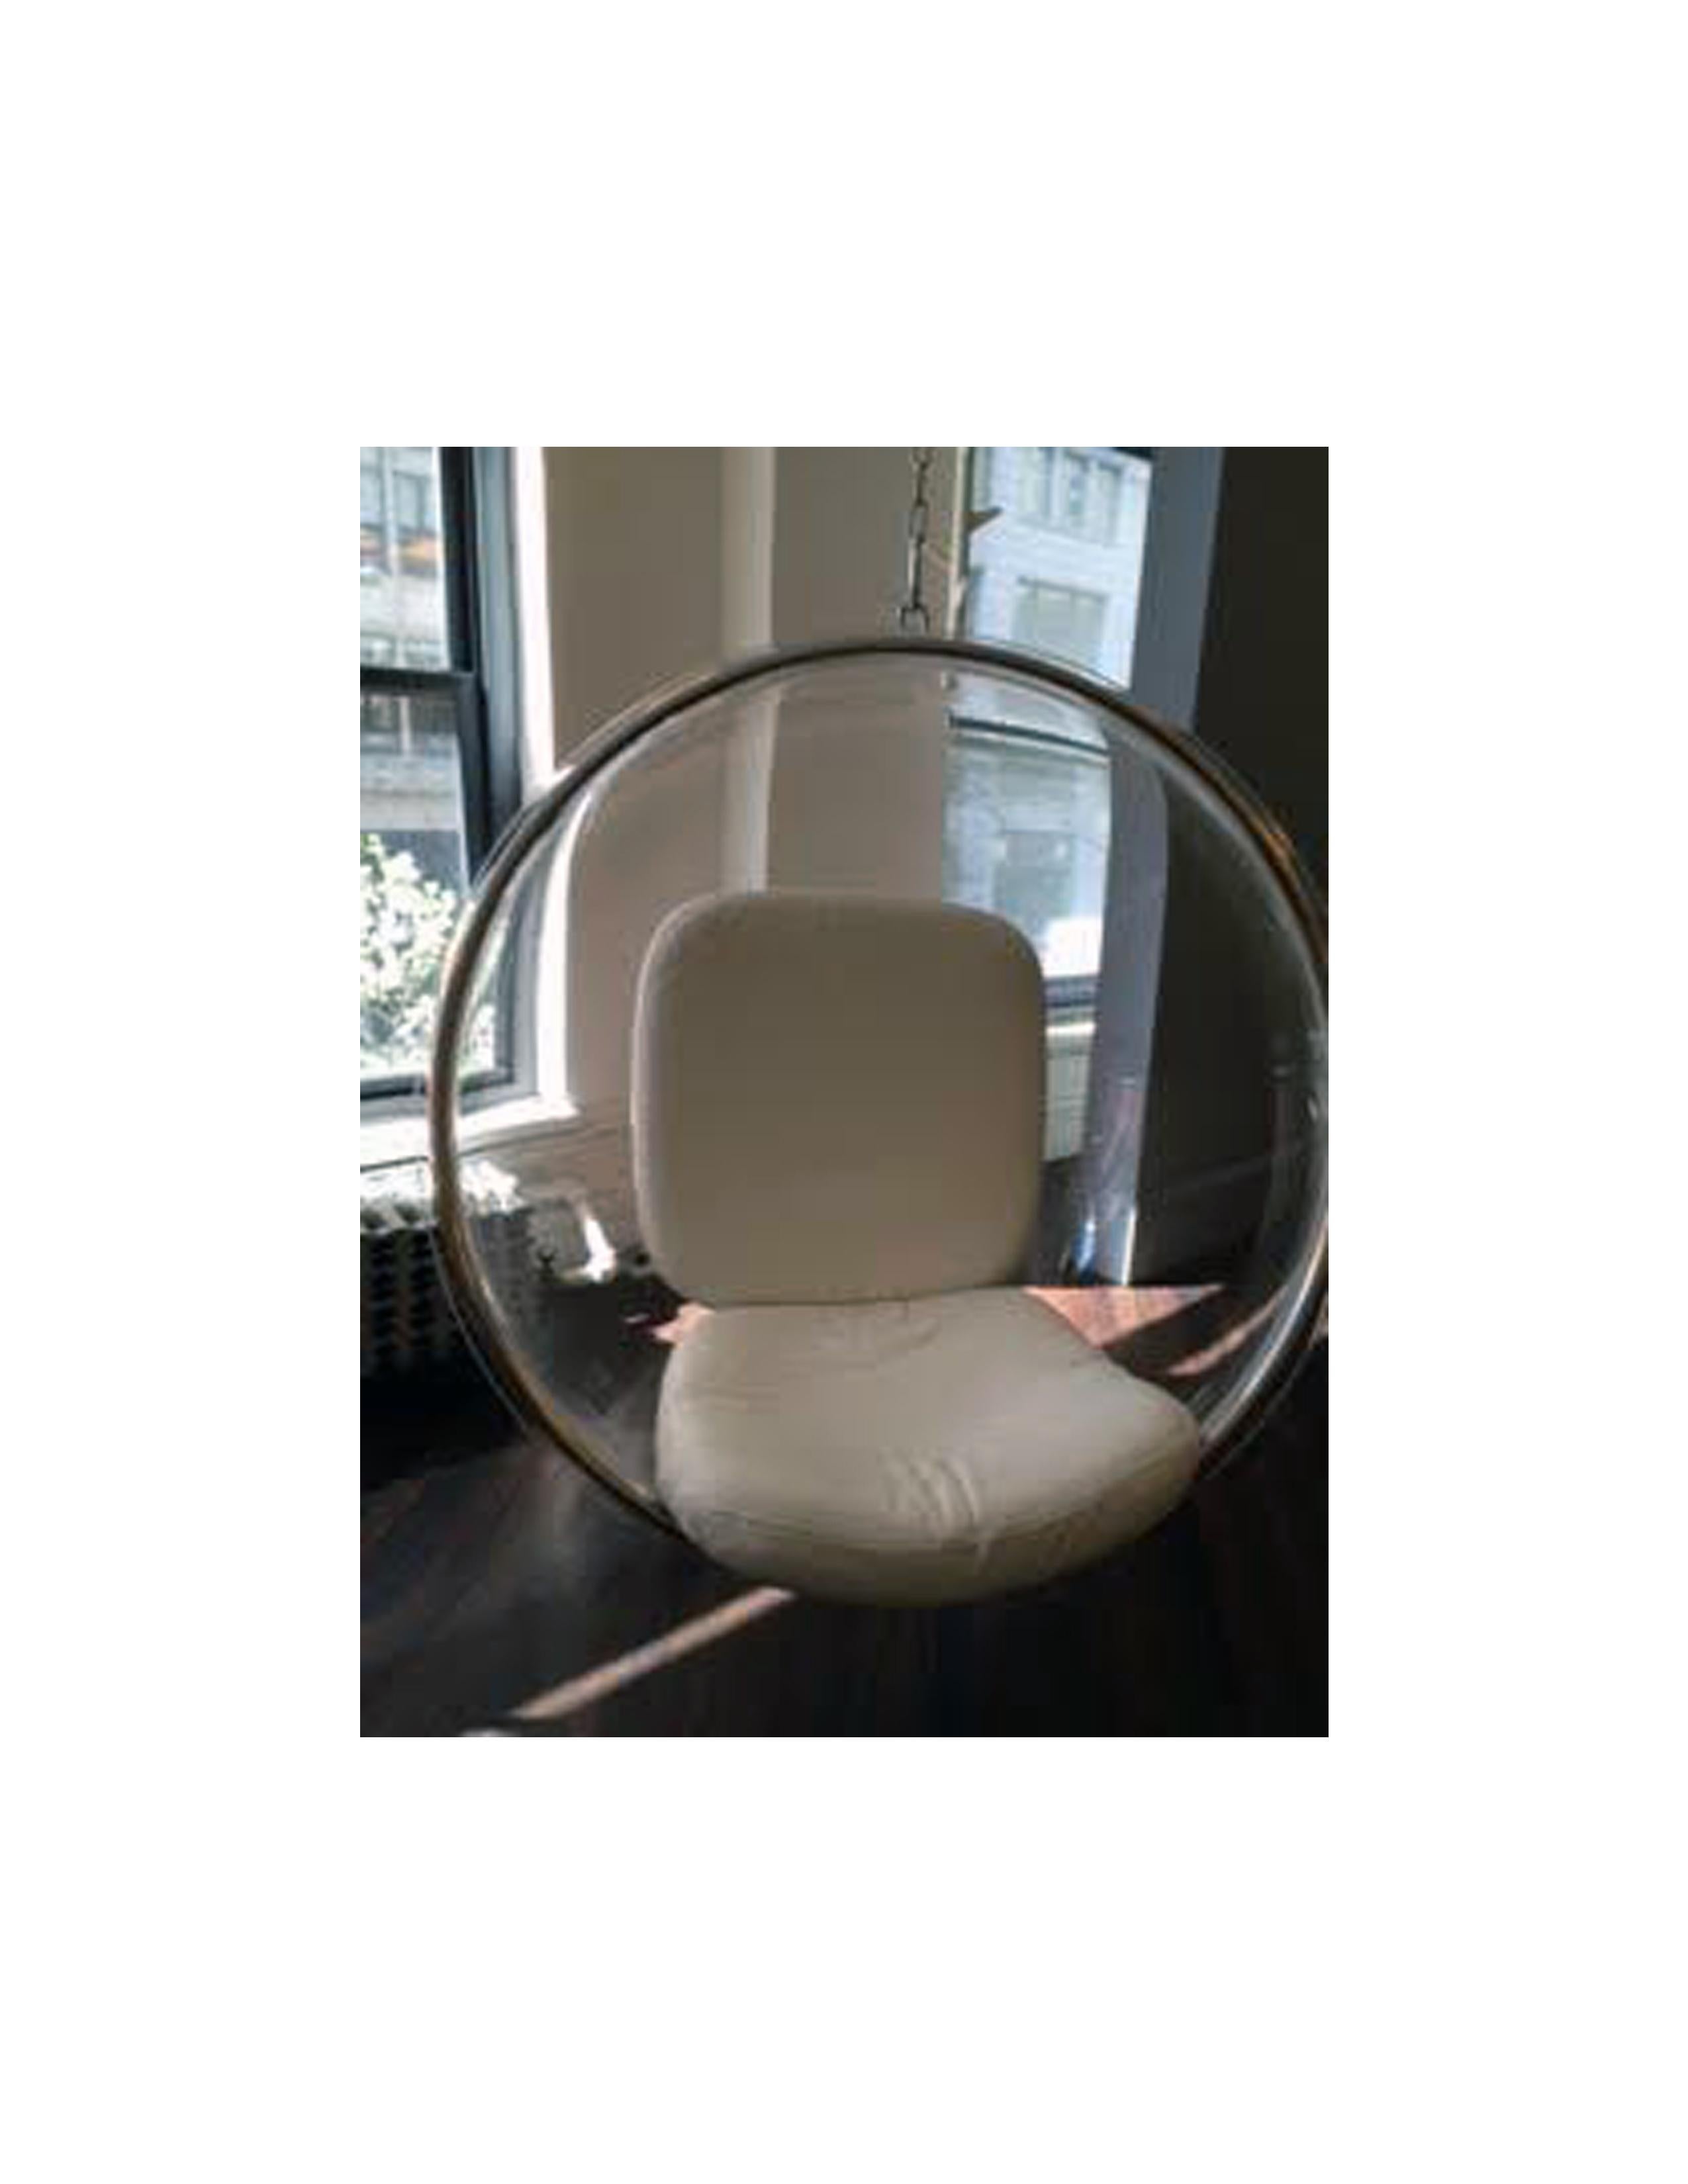 Bubble chair (with white leather cushions)
Designed by Eero Aarnio
Authentic, licensed original.
$4950
Cushions are brand new.
The Bubble chair was designed by Eero Aarnio in 1968. According to Eero’s notes, the Bubble hangs from the ceiling